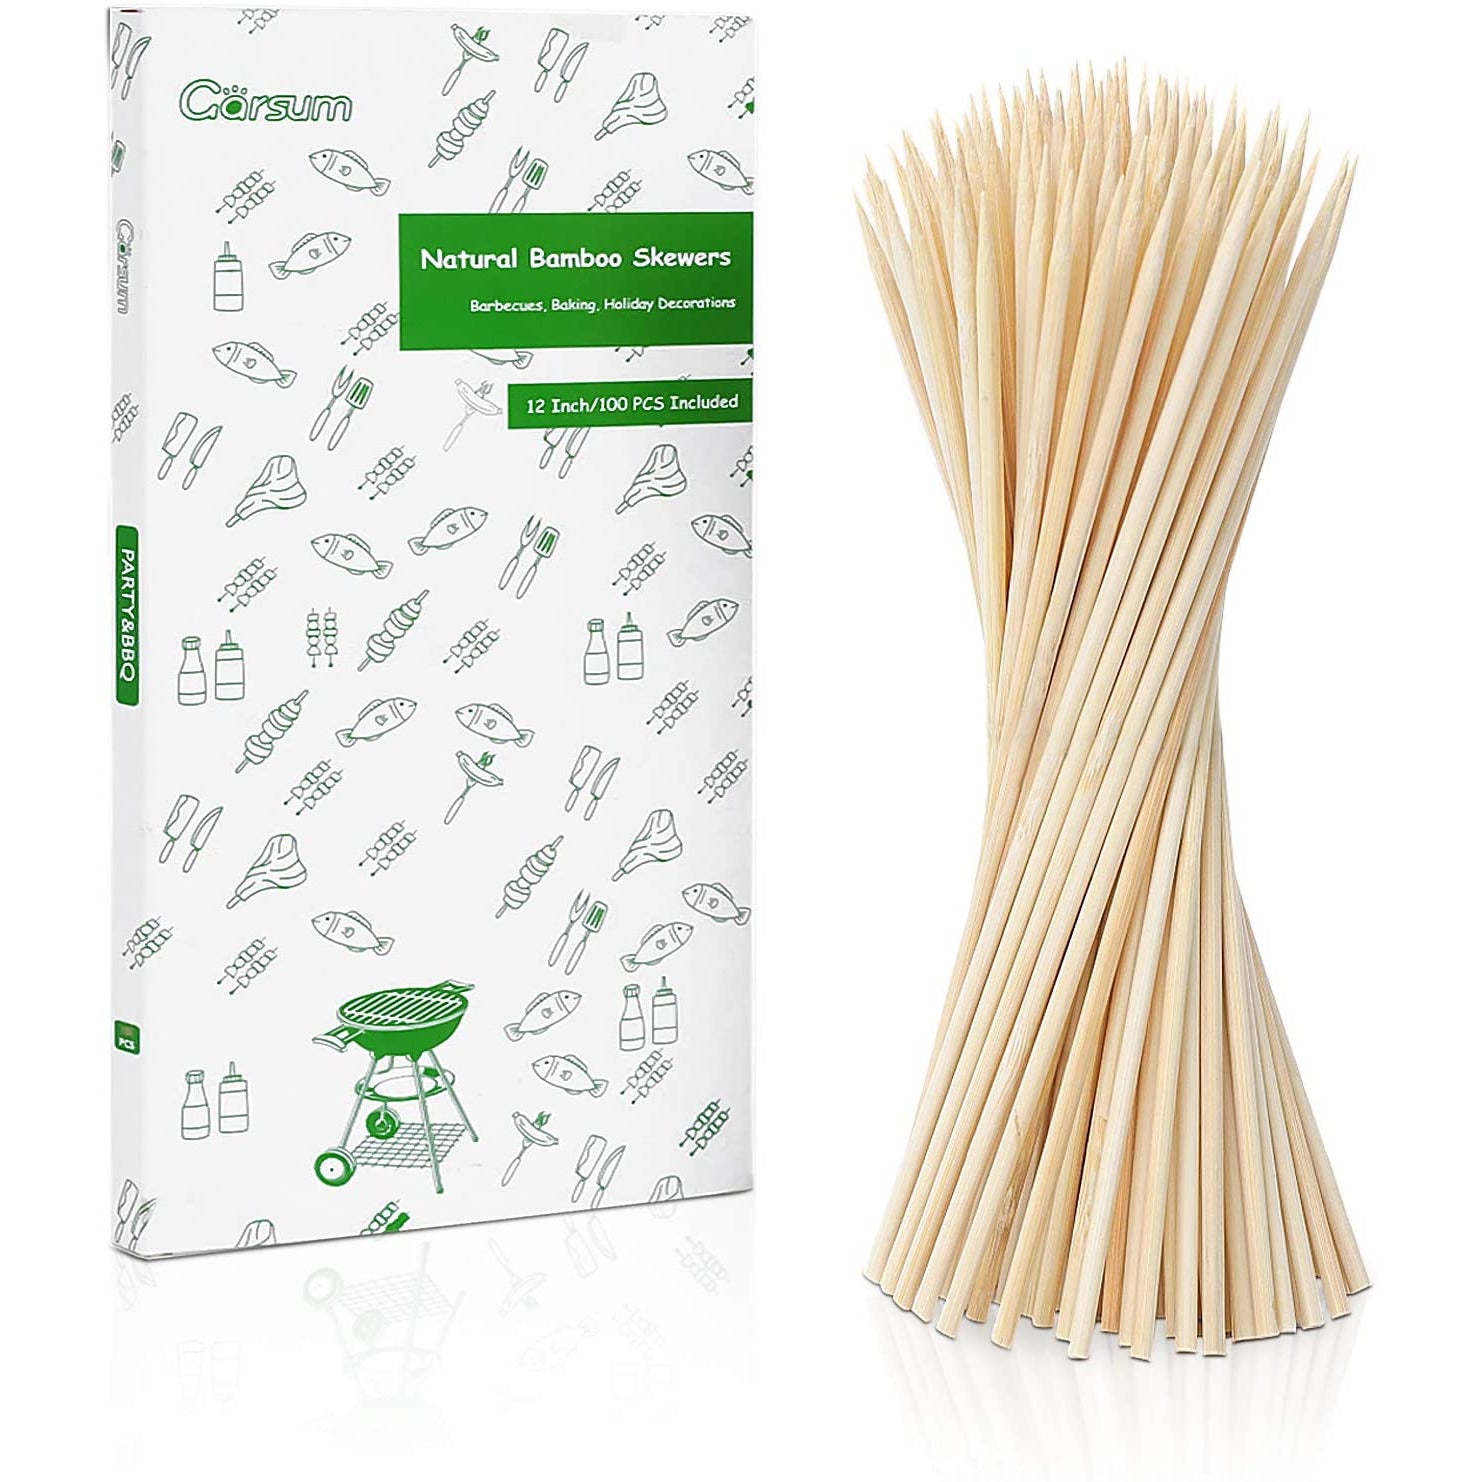 Garsum Natural BBQ Bamboo Skewers, 12" Wooden Skewers for Assorted Fruits, Kebabs, Grill, Highly Renewable Natural Resources, Suitable for Kitchen, Party, Food Catering and Crafting (100 PCS)